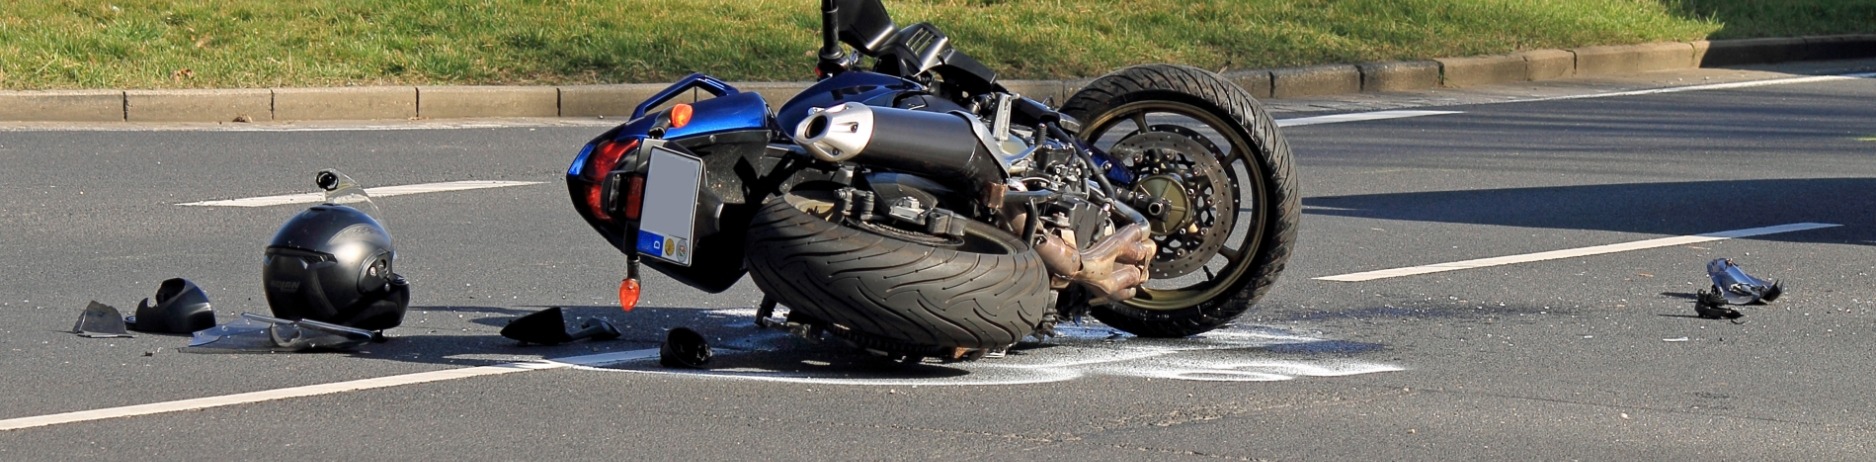 Motorcycle overturned in road with debris reinforcing the severity of motorcycle accident statistics